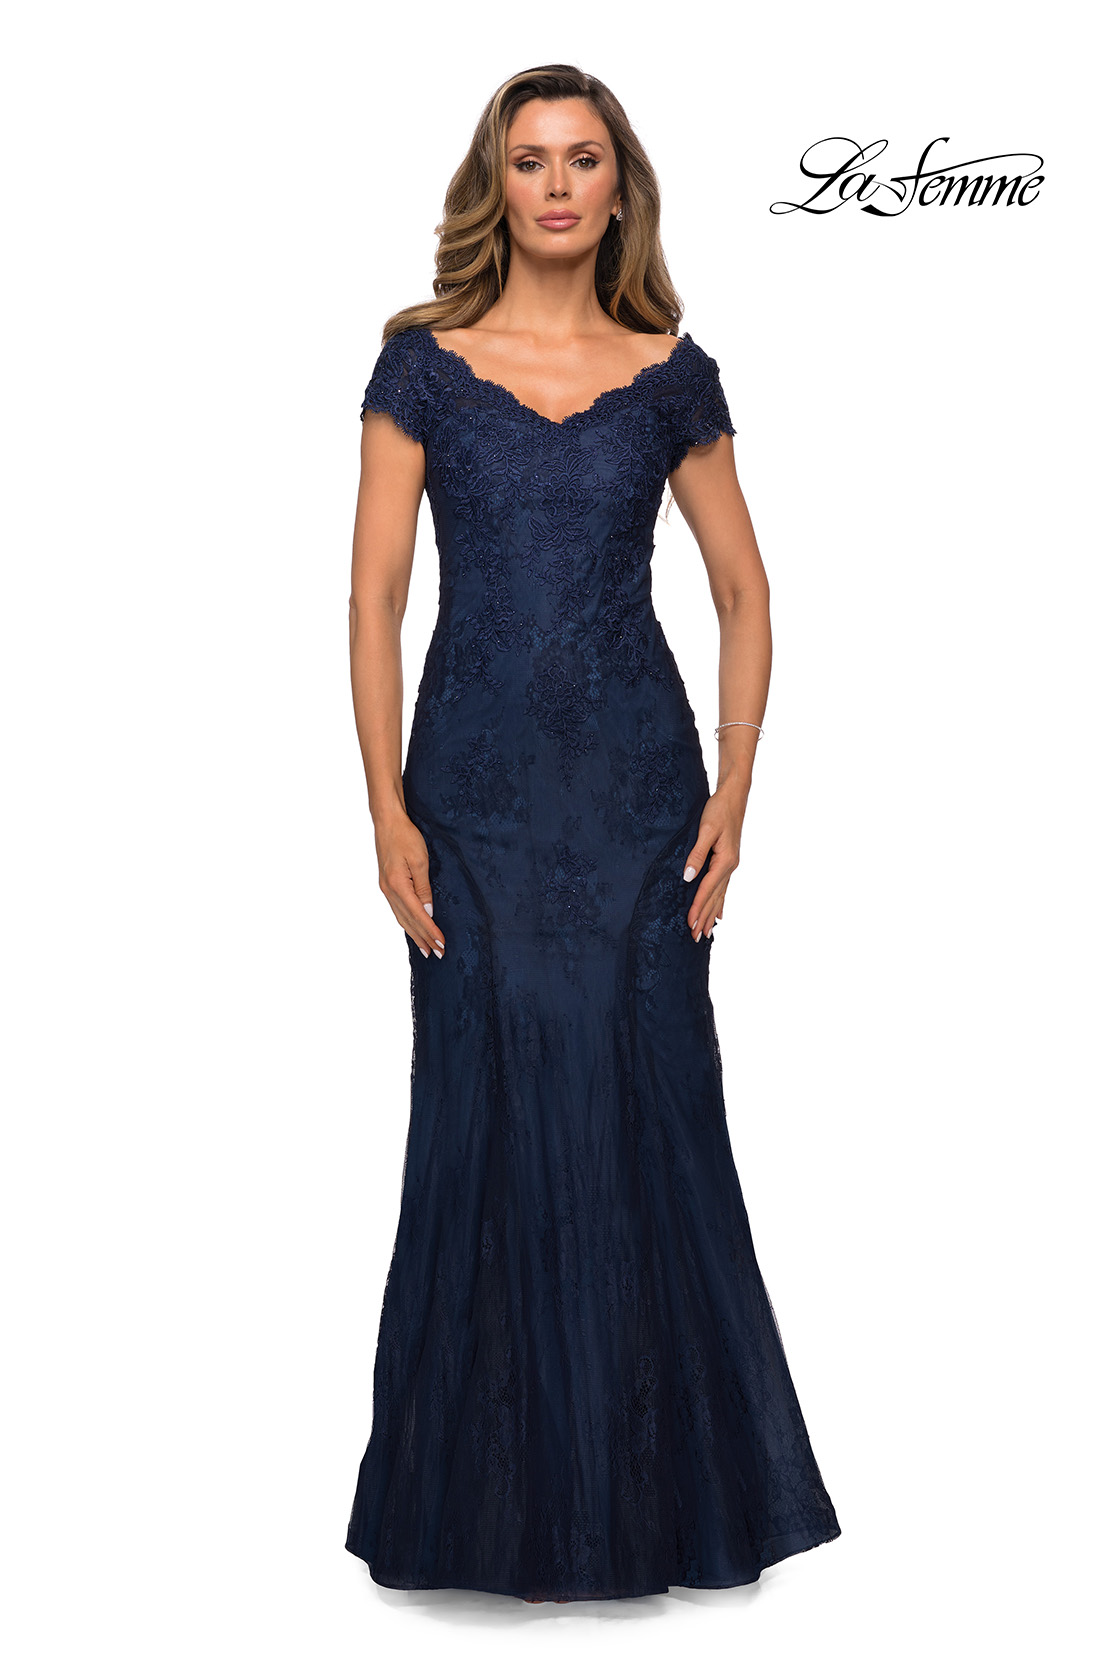 Glamorous Navy Blue Lace Tulle V Neck See Through Prom Dress